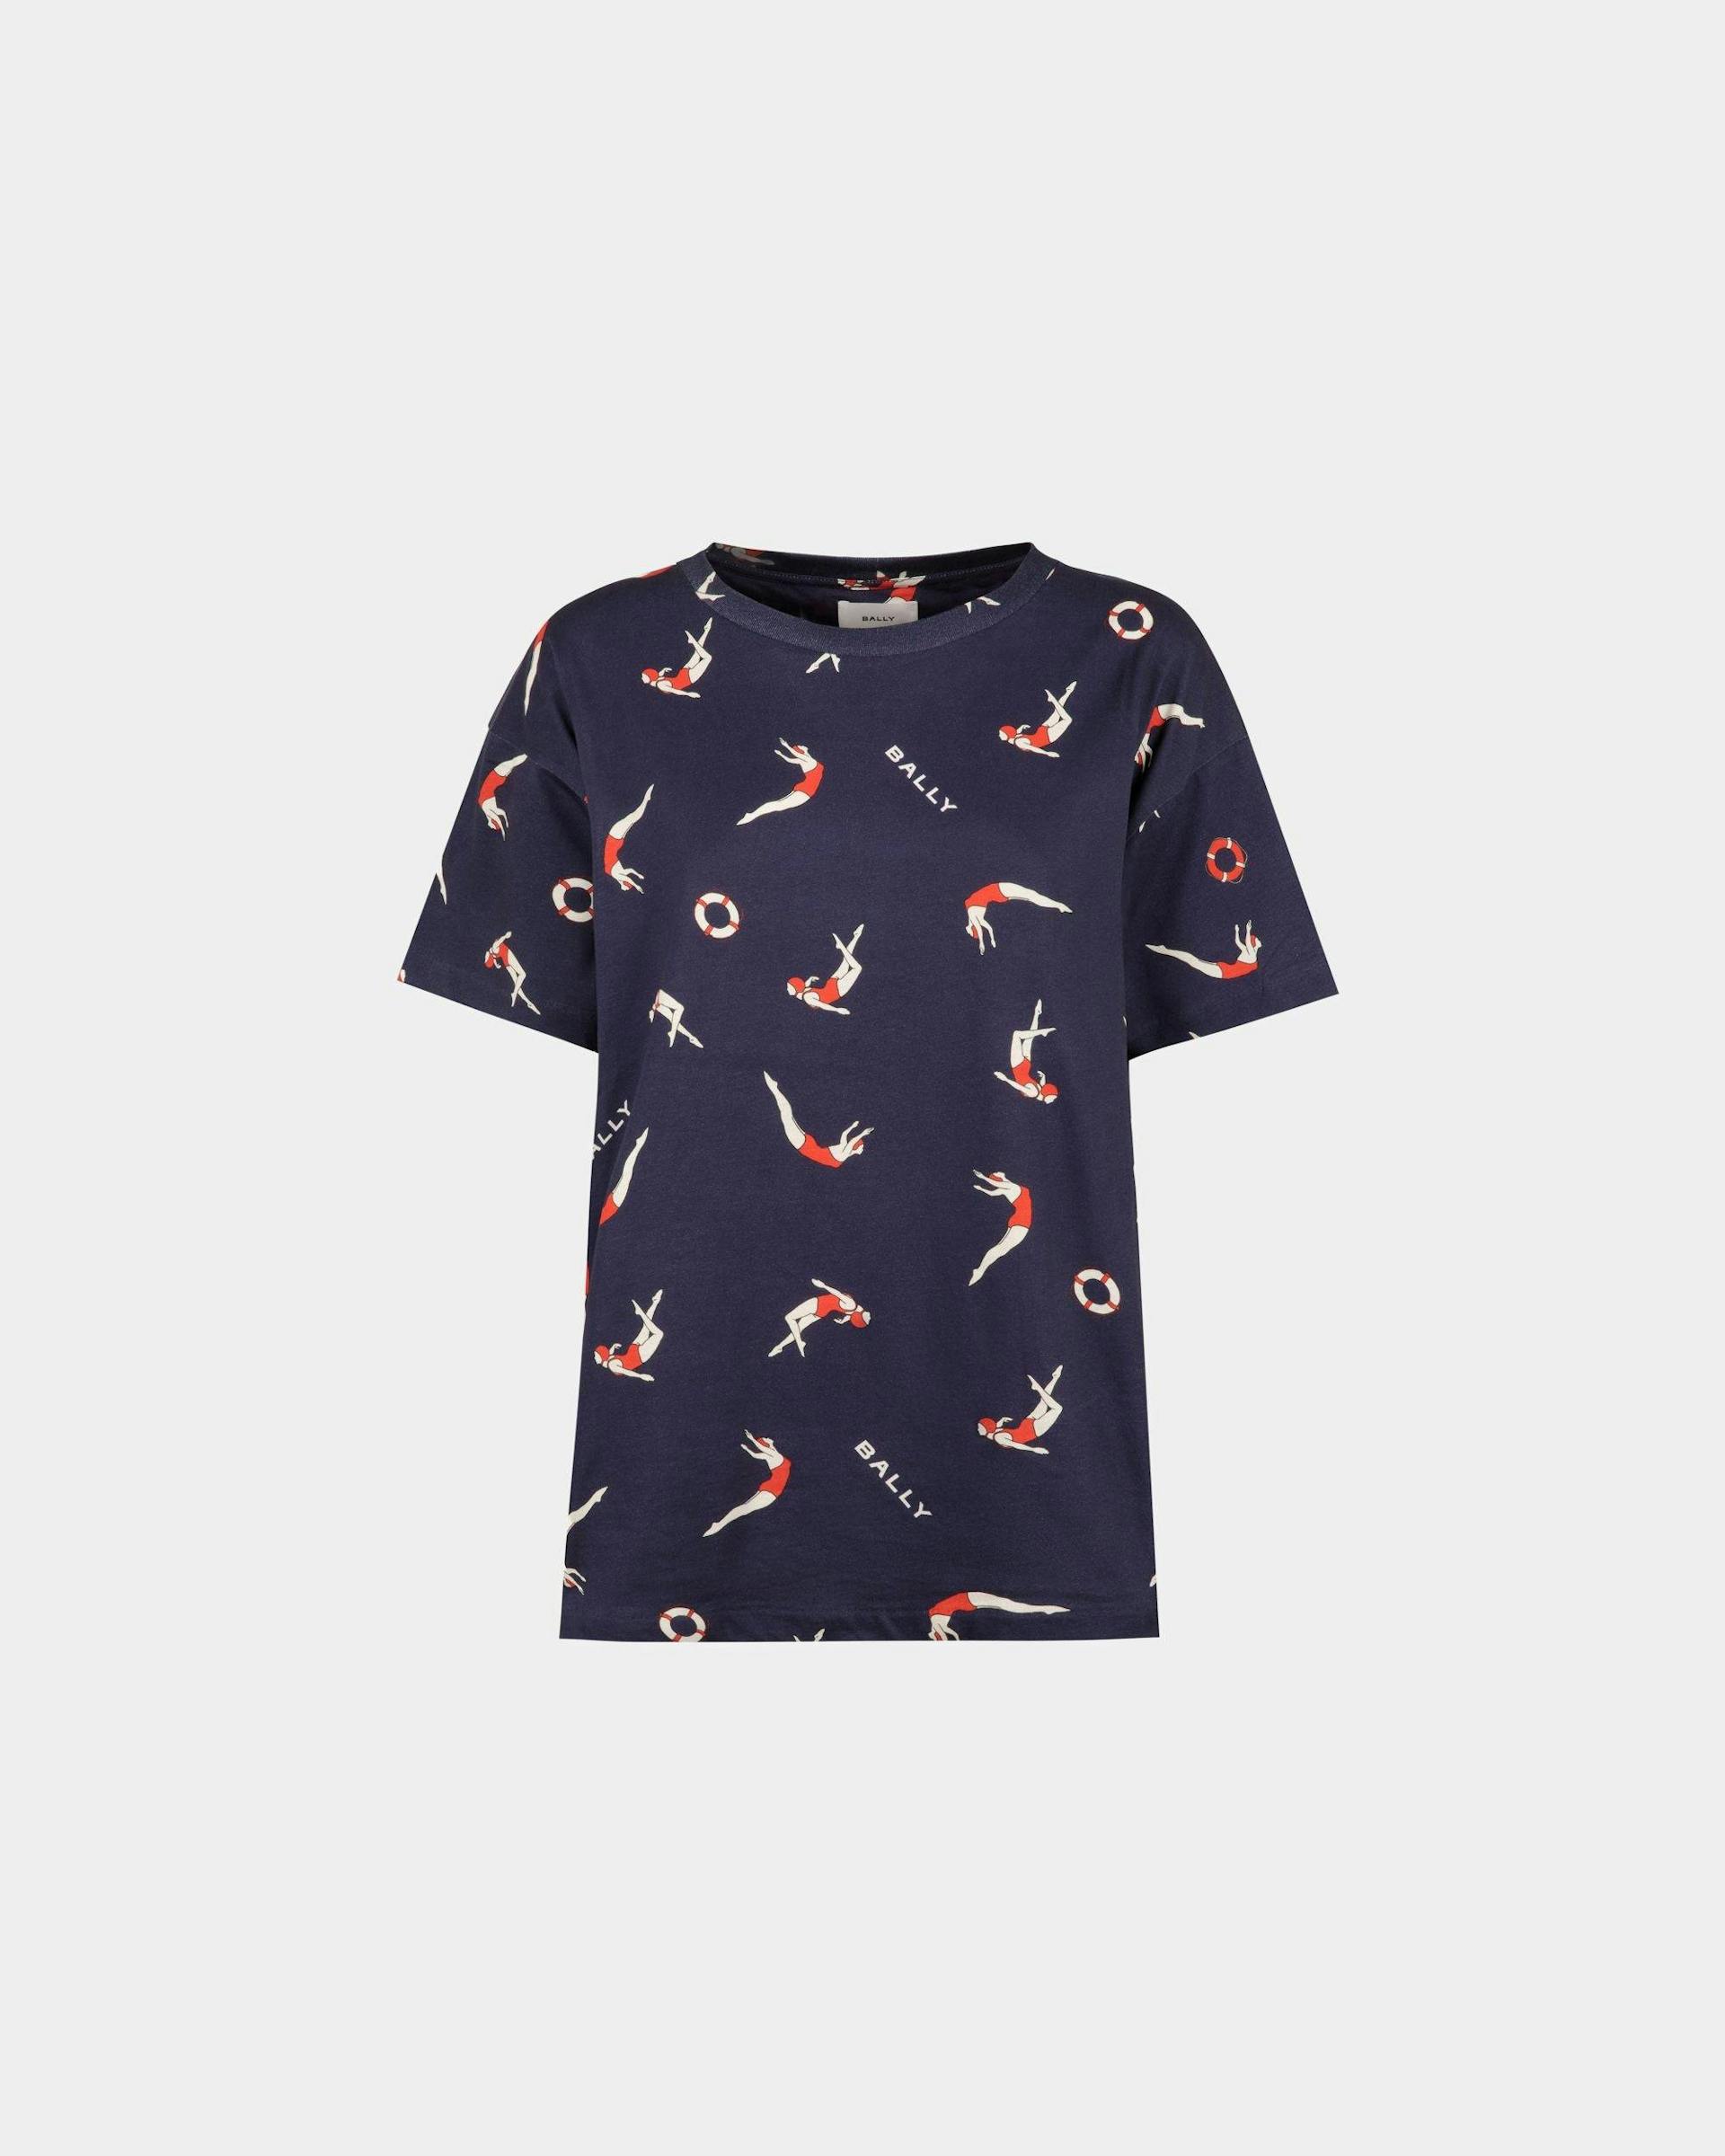 Women's Printed T-shirt in Cotton | Bally | Still Life Front